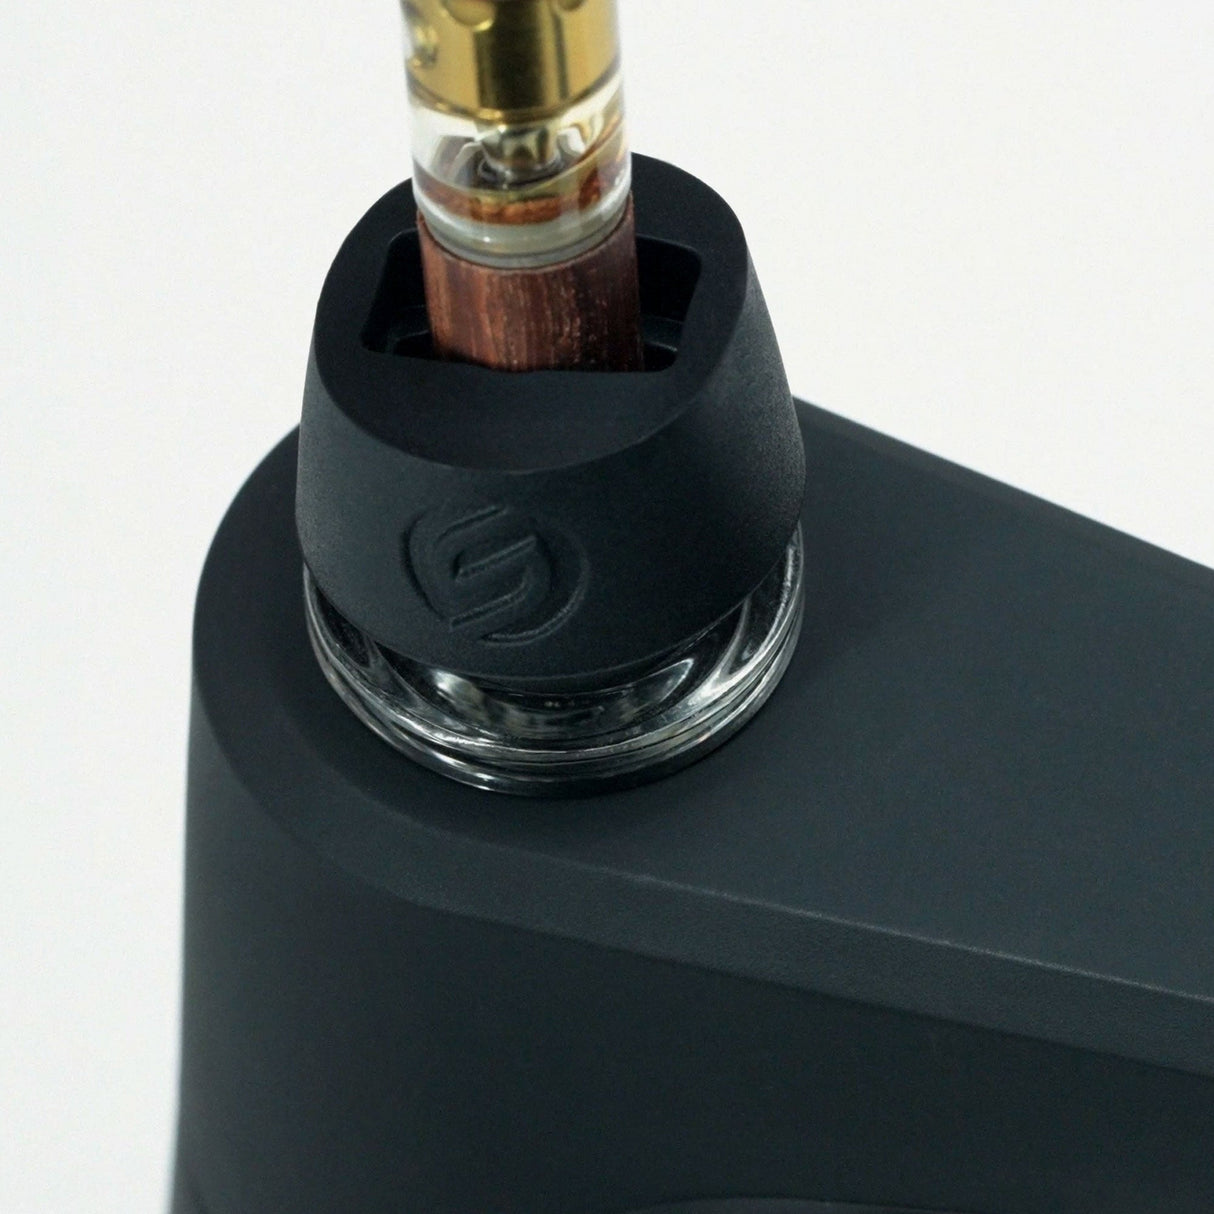 SoftGlass Easy-Attach Durable Cartridge Adapter for Smokers